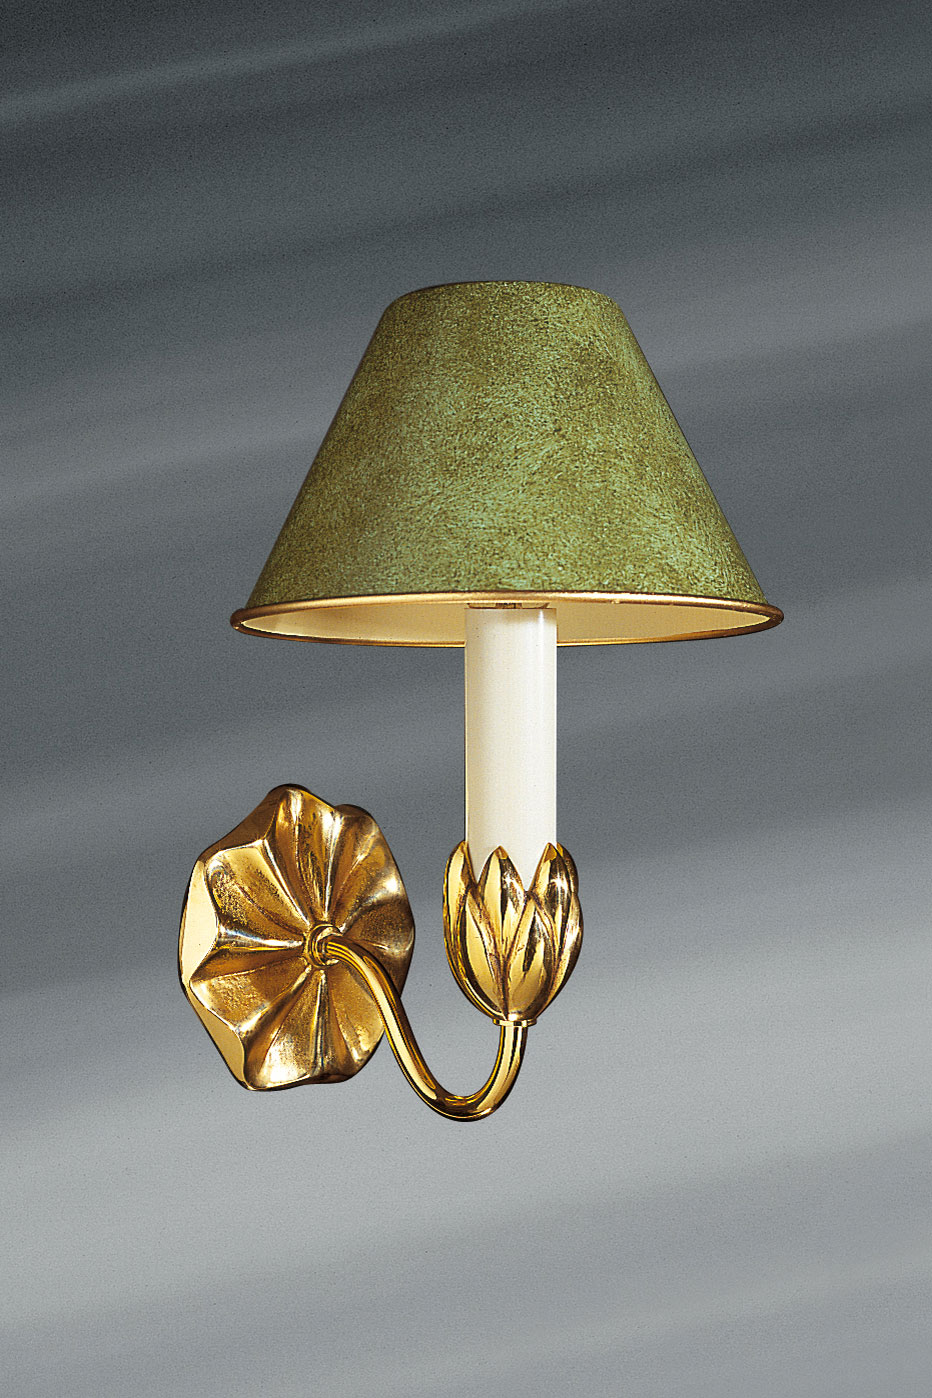 Nymphéa wall light in gold and green metal, Lucien Gau